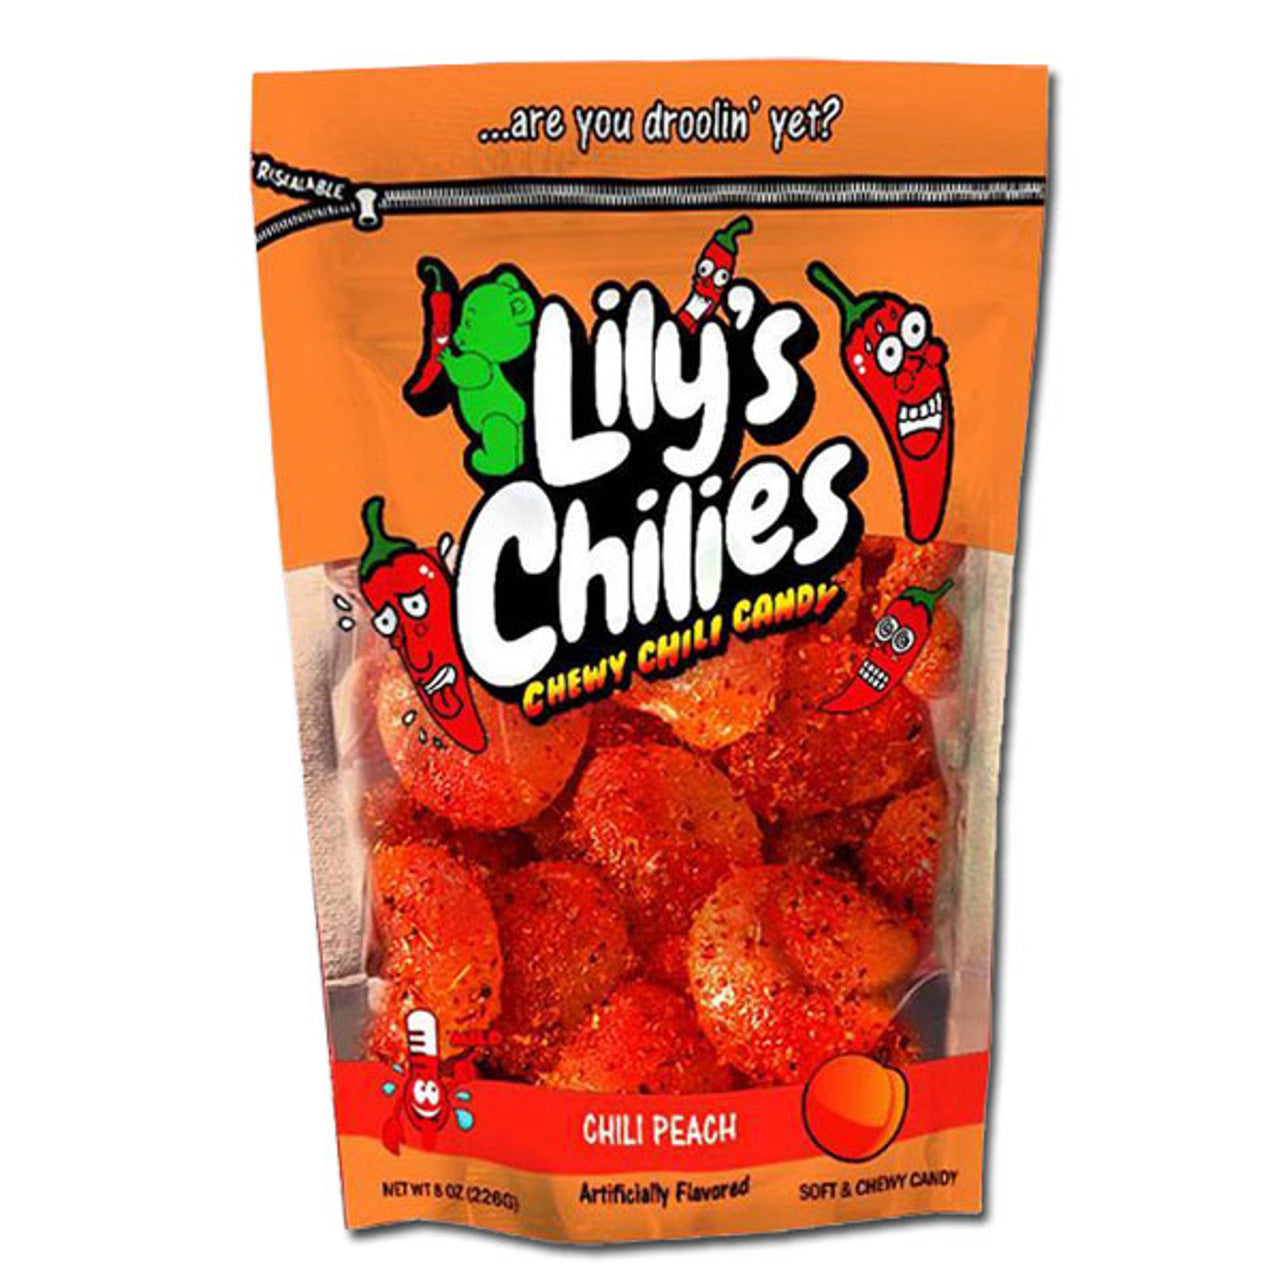 Lily's Chilies - Chili Peach